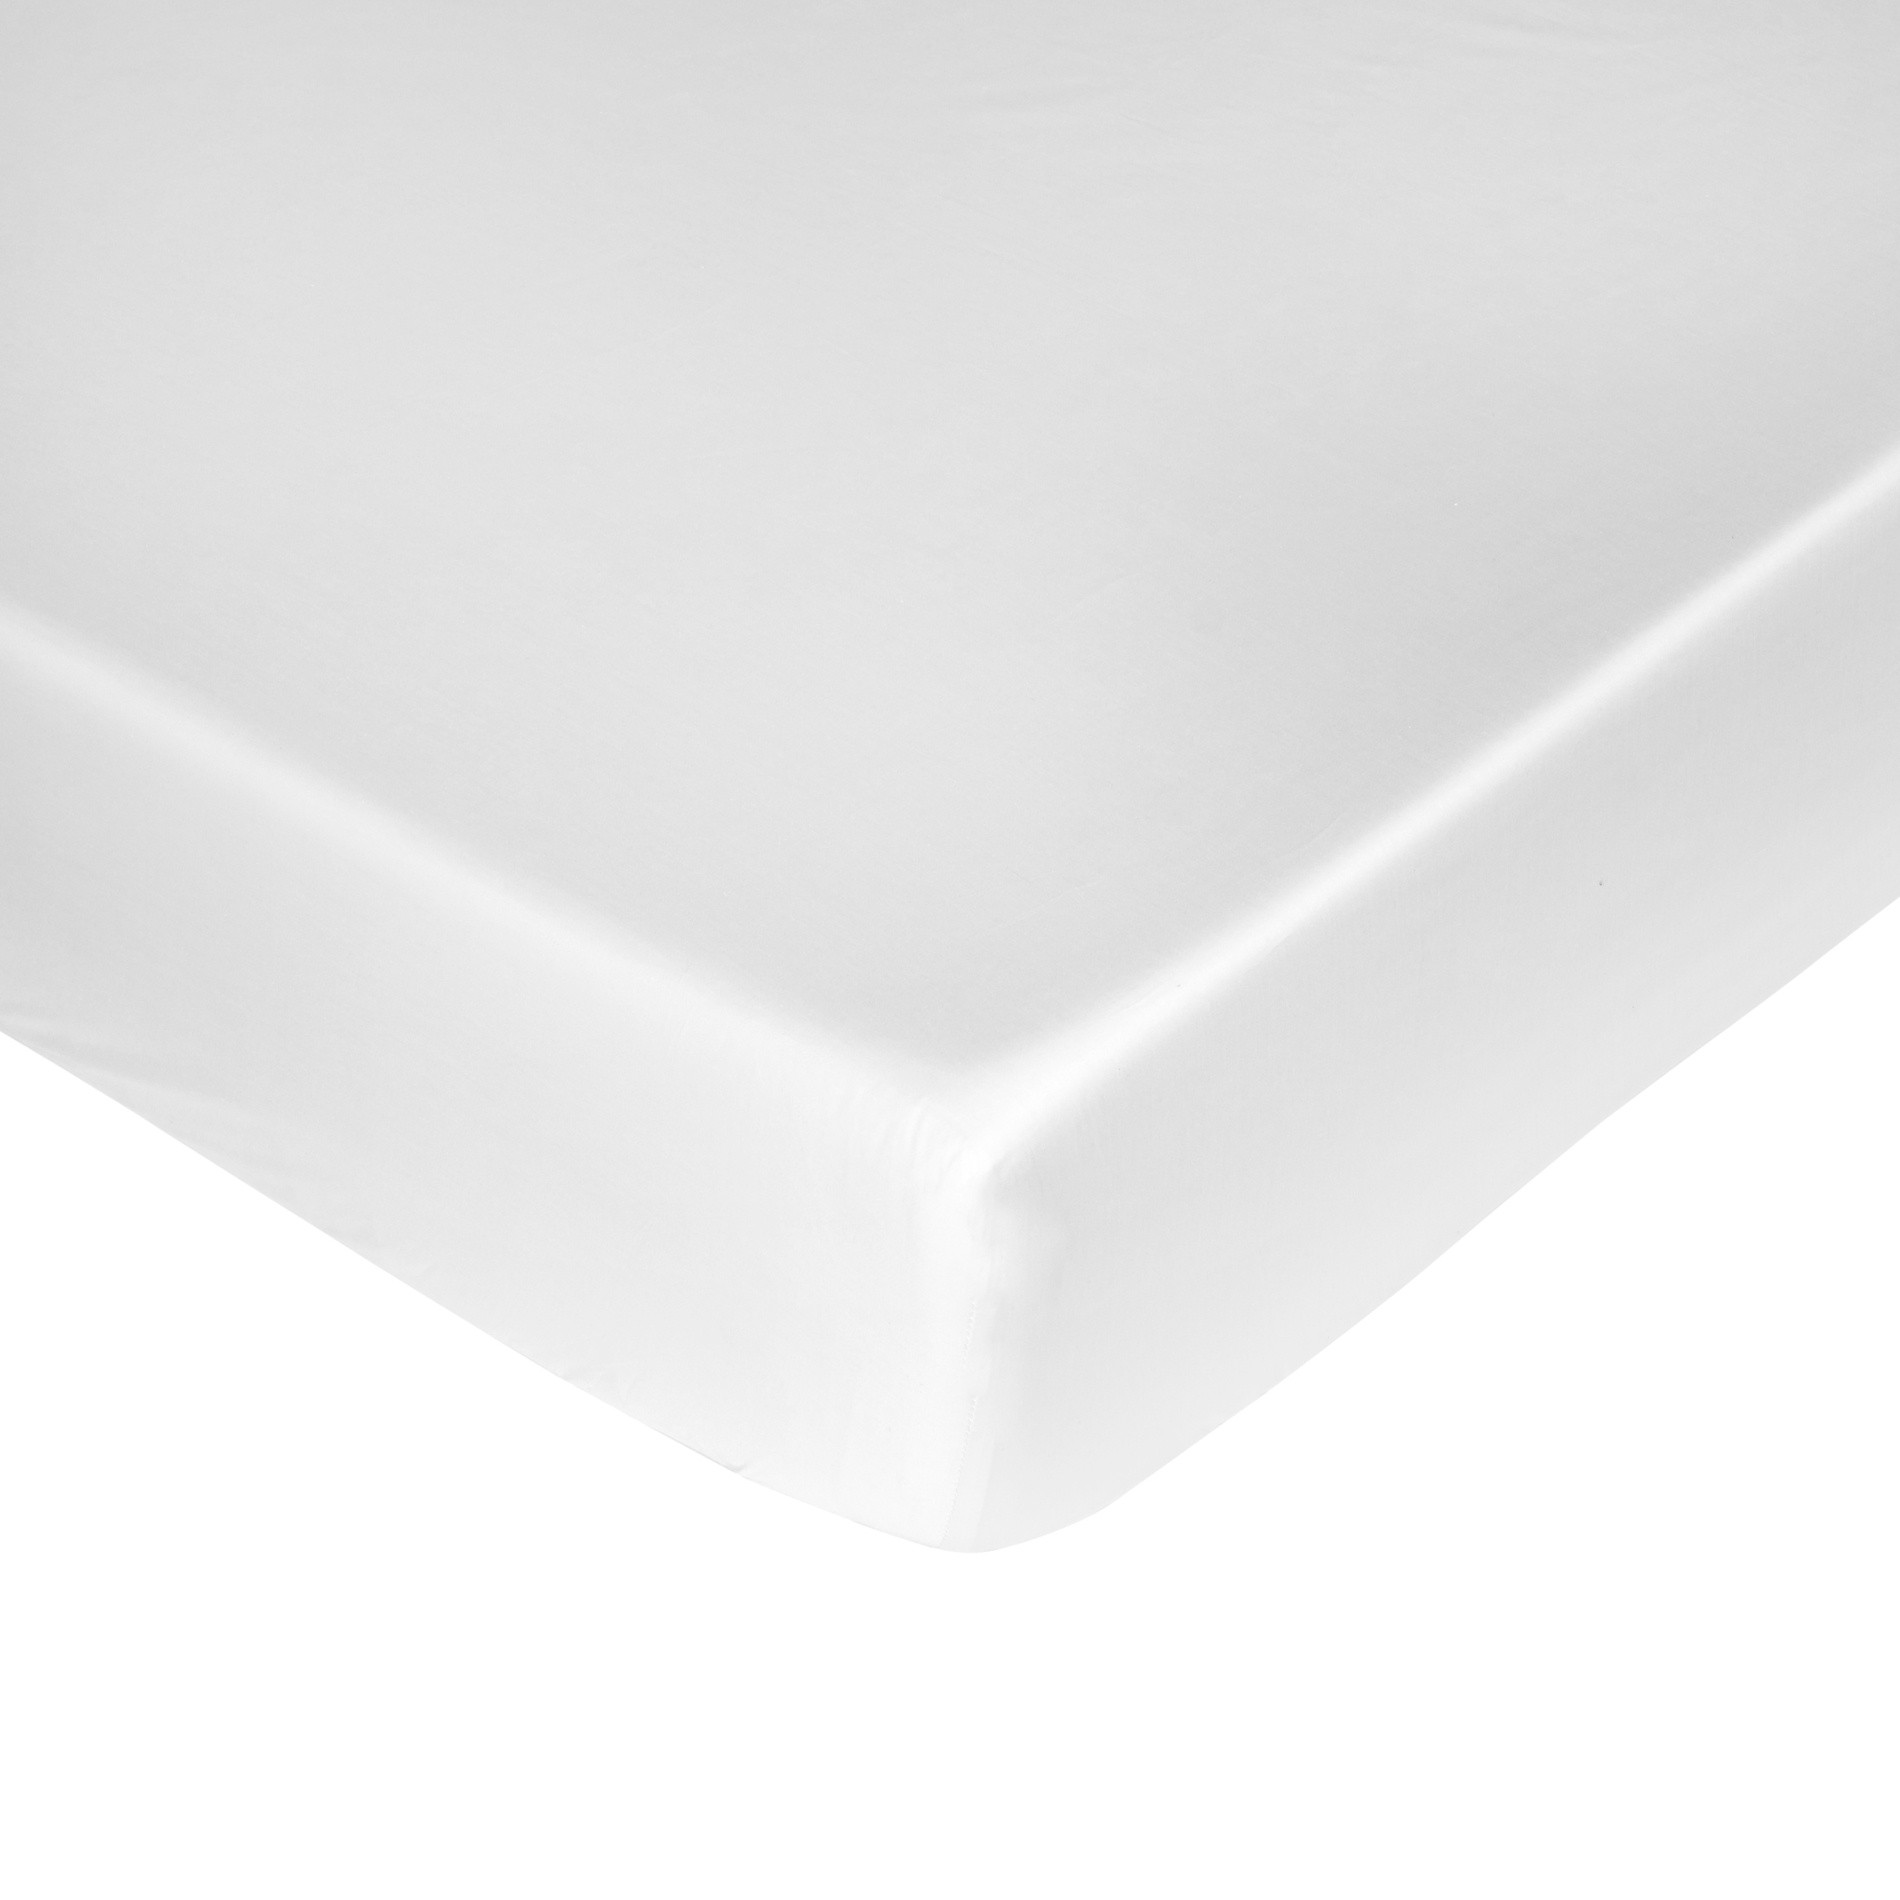 Fitted sheet in TC400 satin cotton, White 2, large image number 0